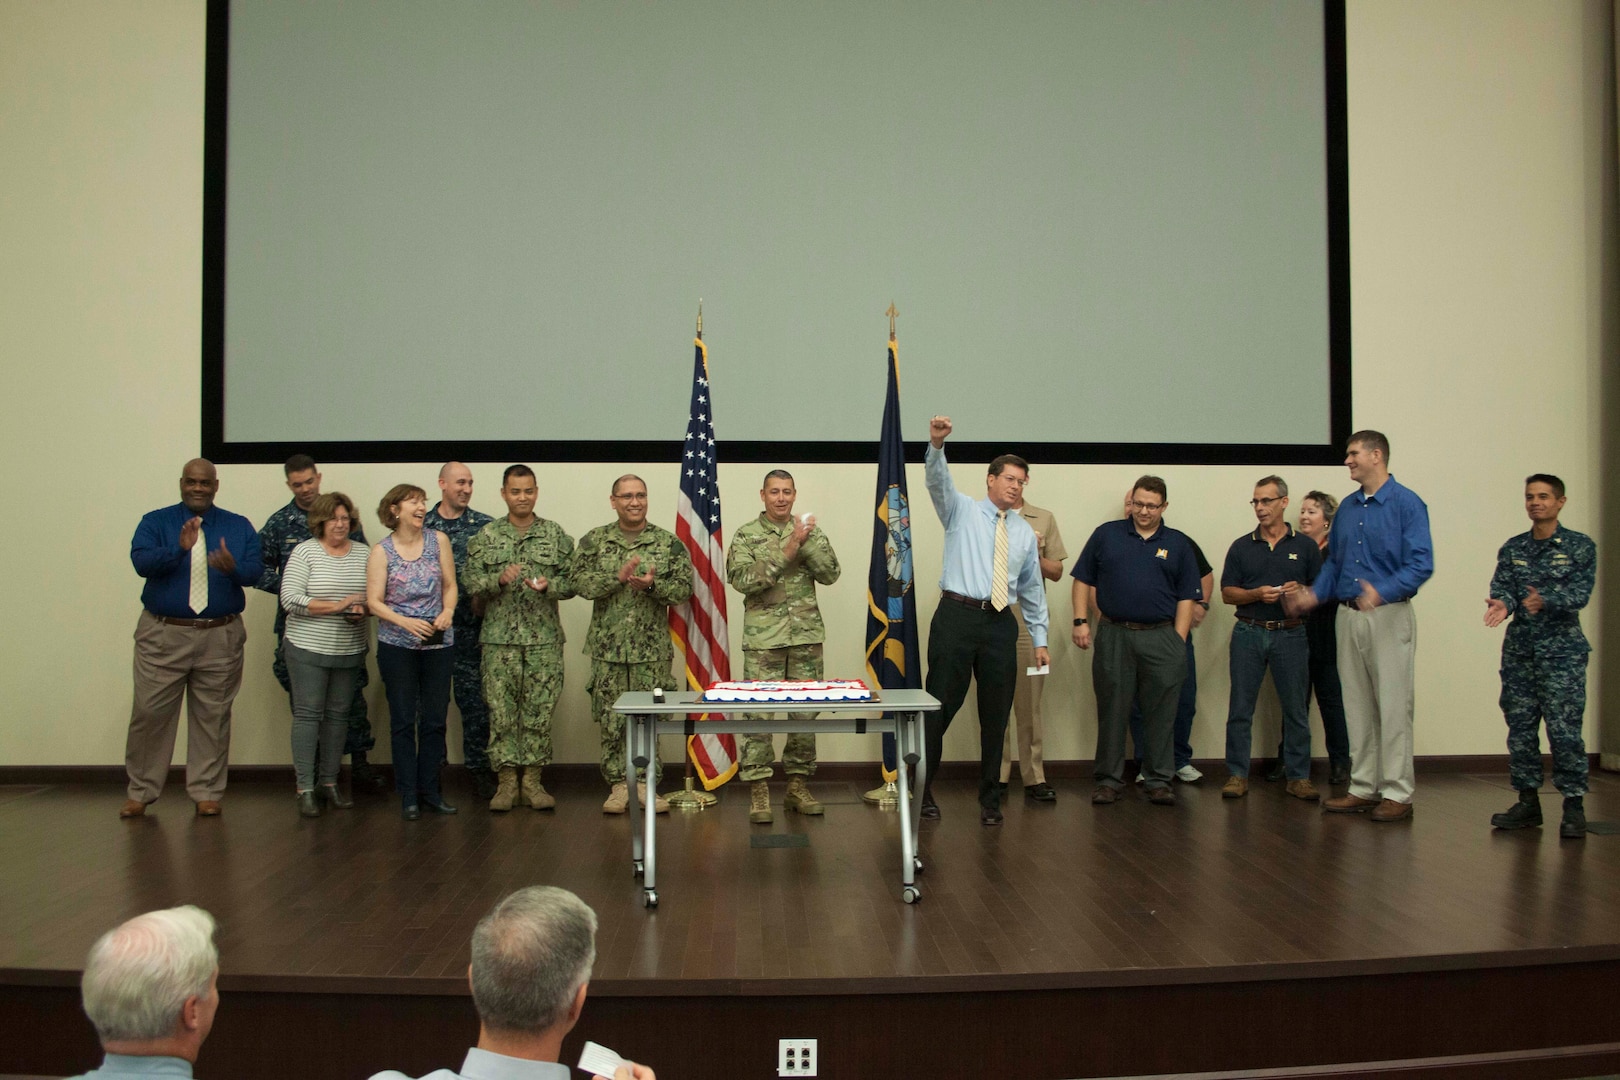 DLA Distribution commander Army Brig. Gen. John S. Laskodi, center, sings the Navy song in honor of the Navy’s 242nd birthday alongside DLA Distribution’s active, reserve and retired Navy sailors.